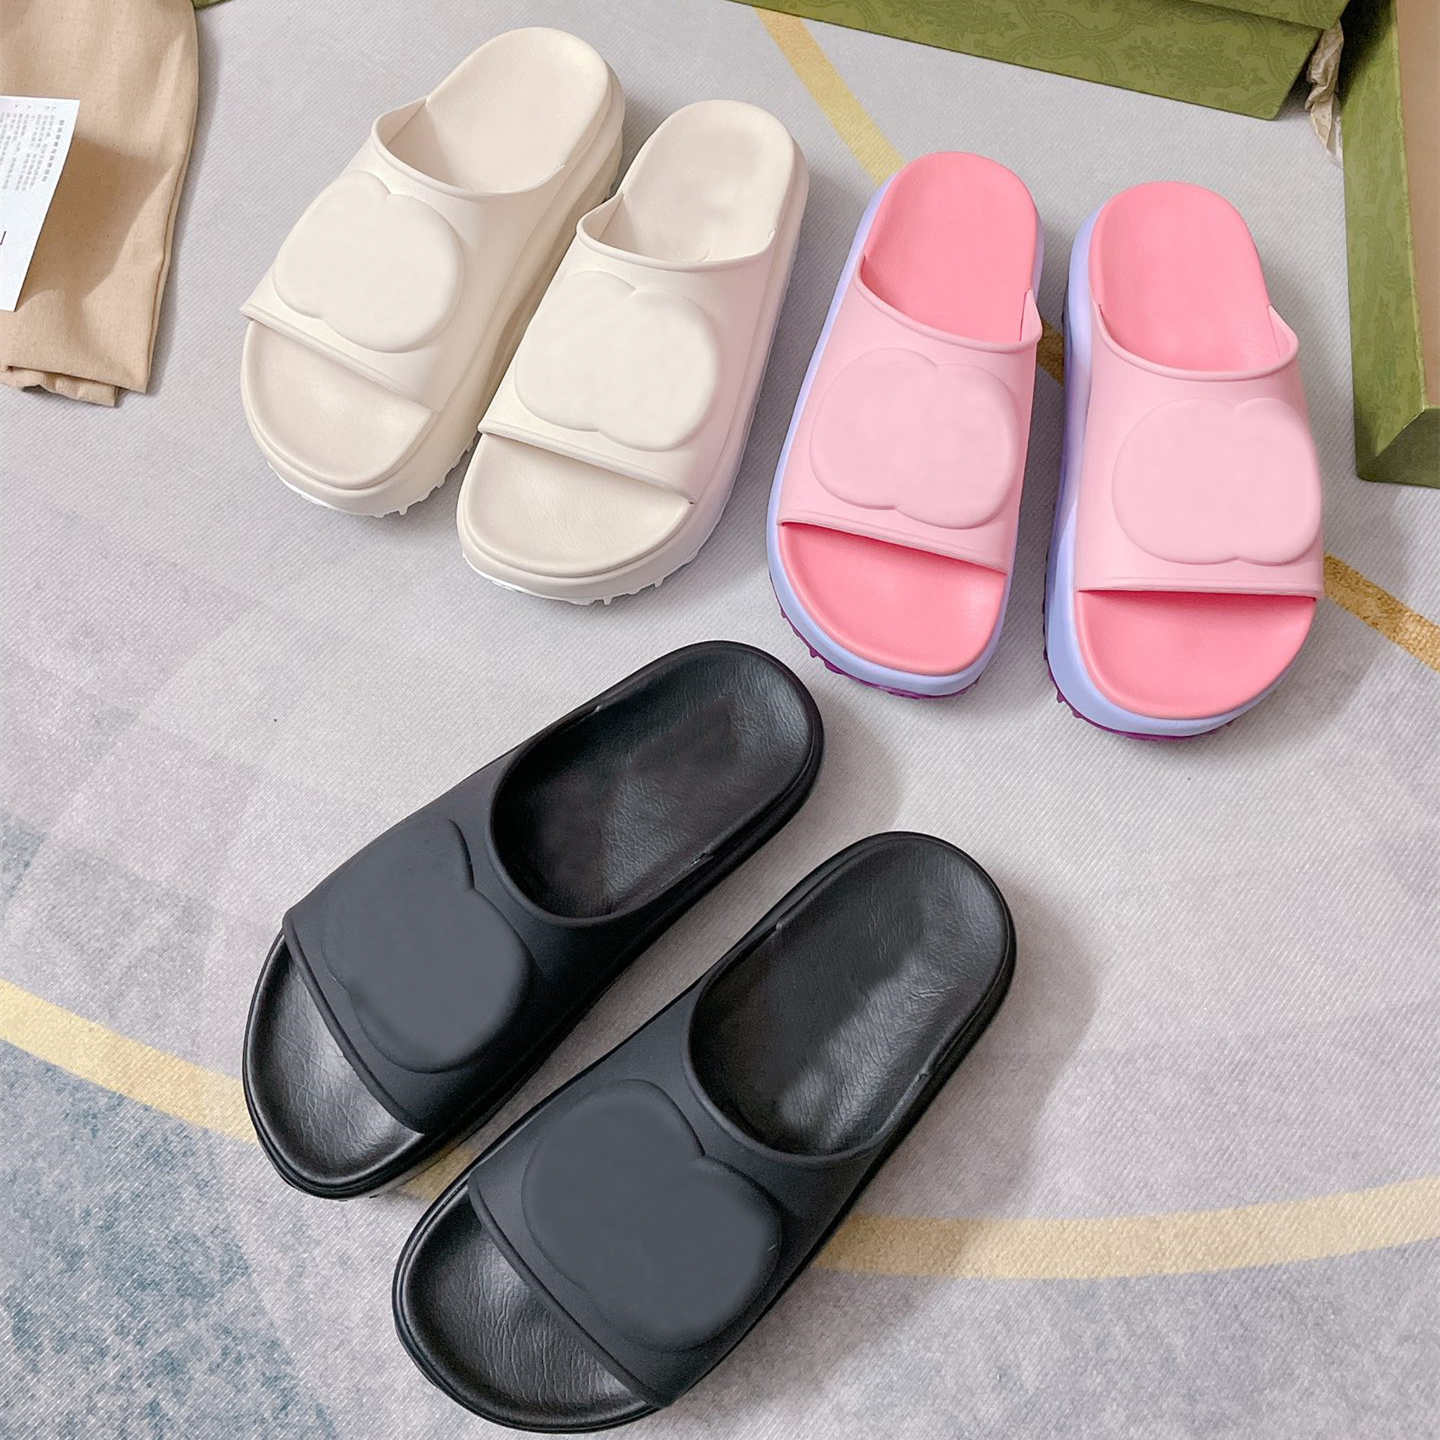 

Thick Bottom Designer Slippers Fashion Soft Foam Rubber Wedges Sandals For Women Girls pantoufle miami Summer Beach Shoes Platform Slides Mules Loafers sandales, Shoes box